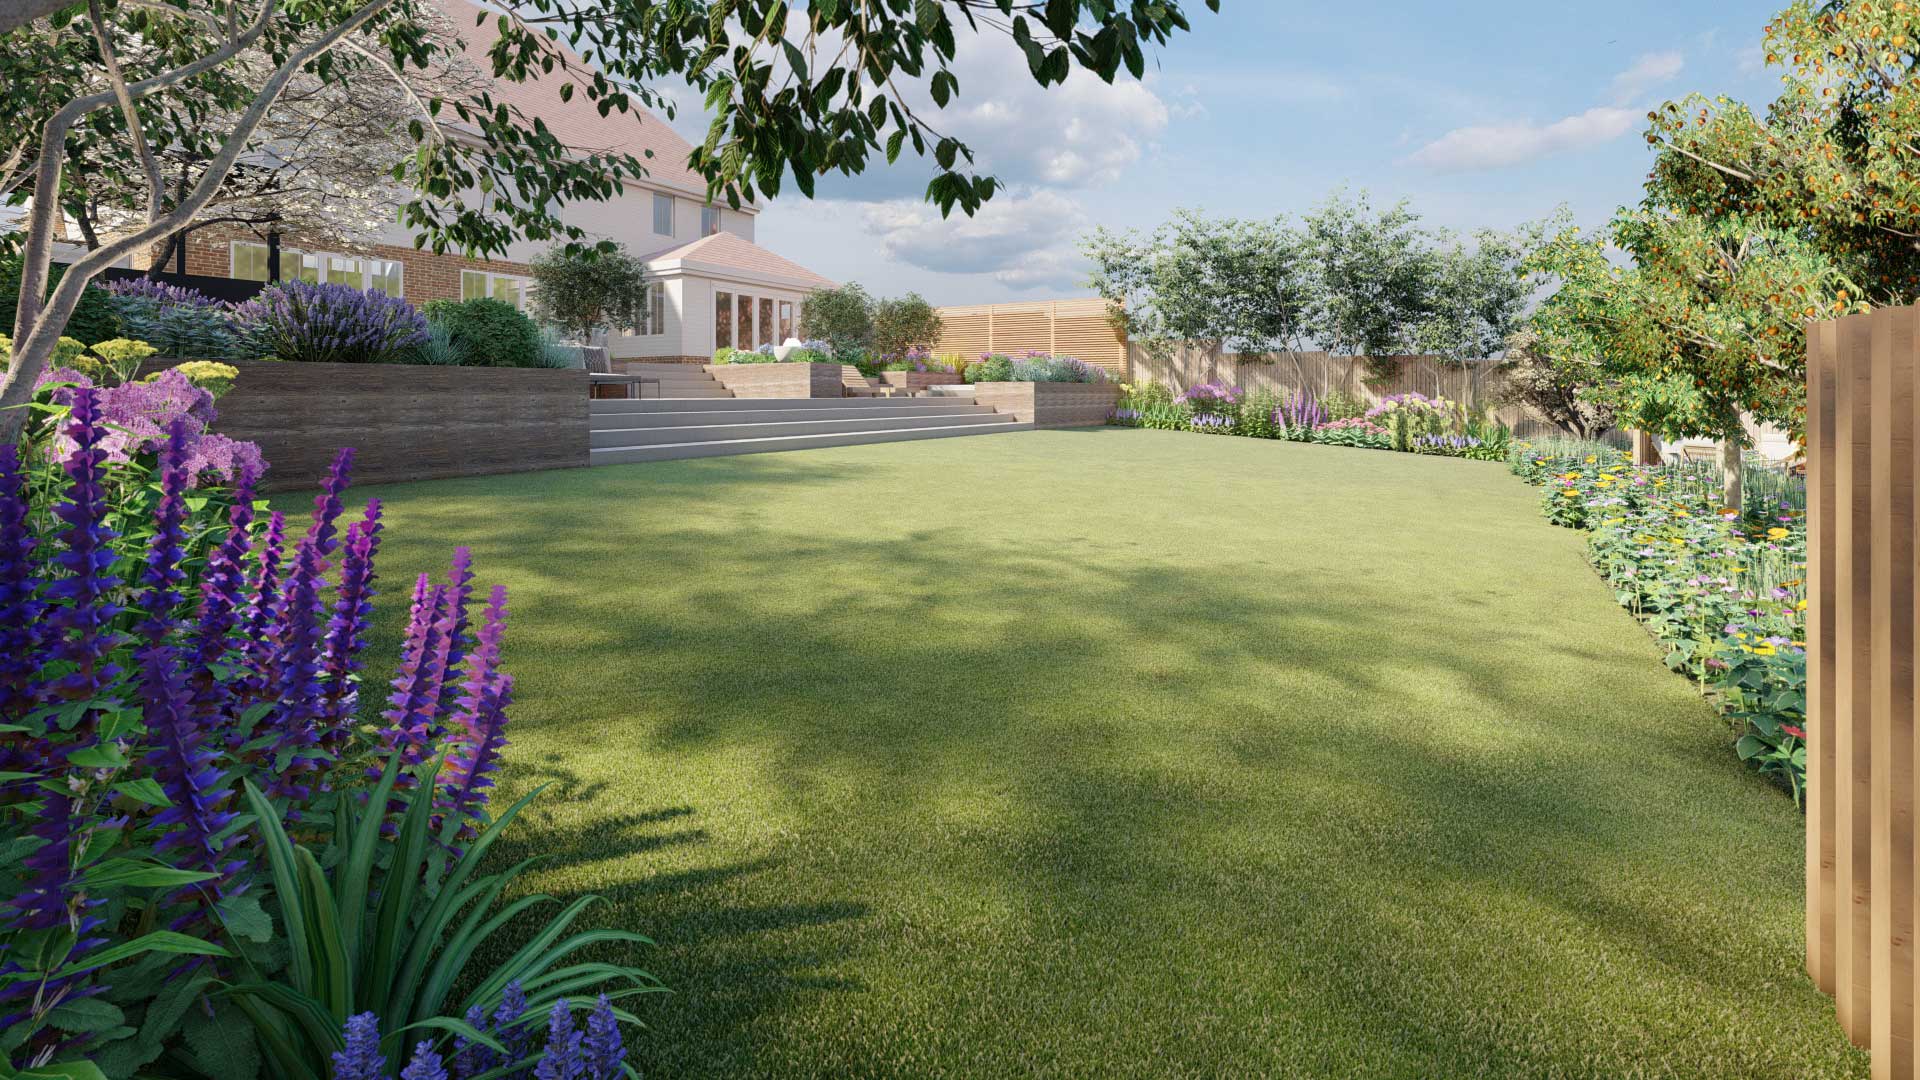 Large lawn space in a new garden with lots of flowers and large patio that has steps leading up to the house